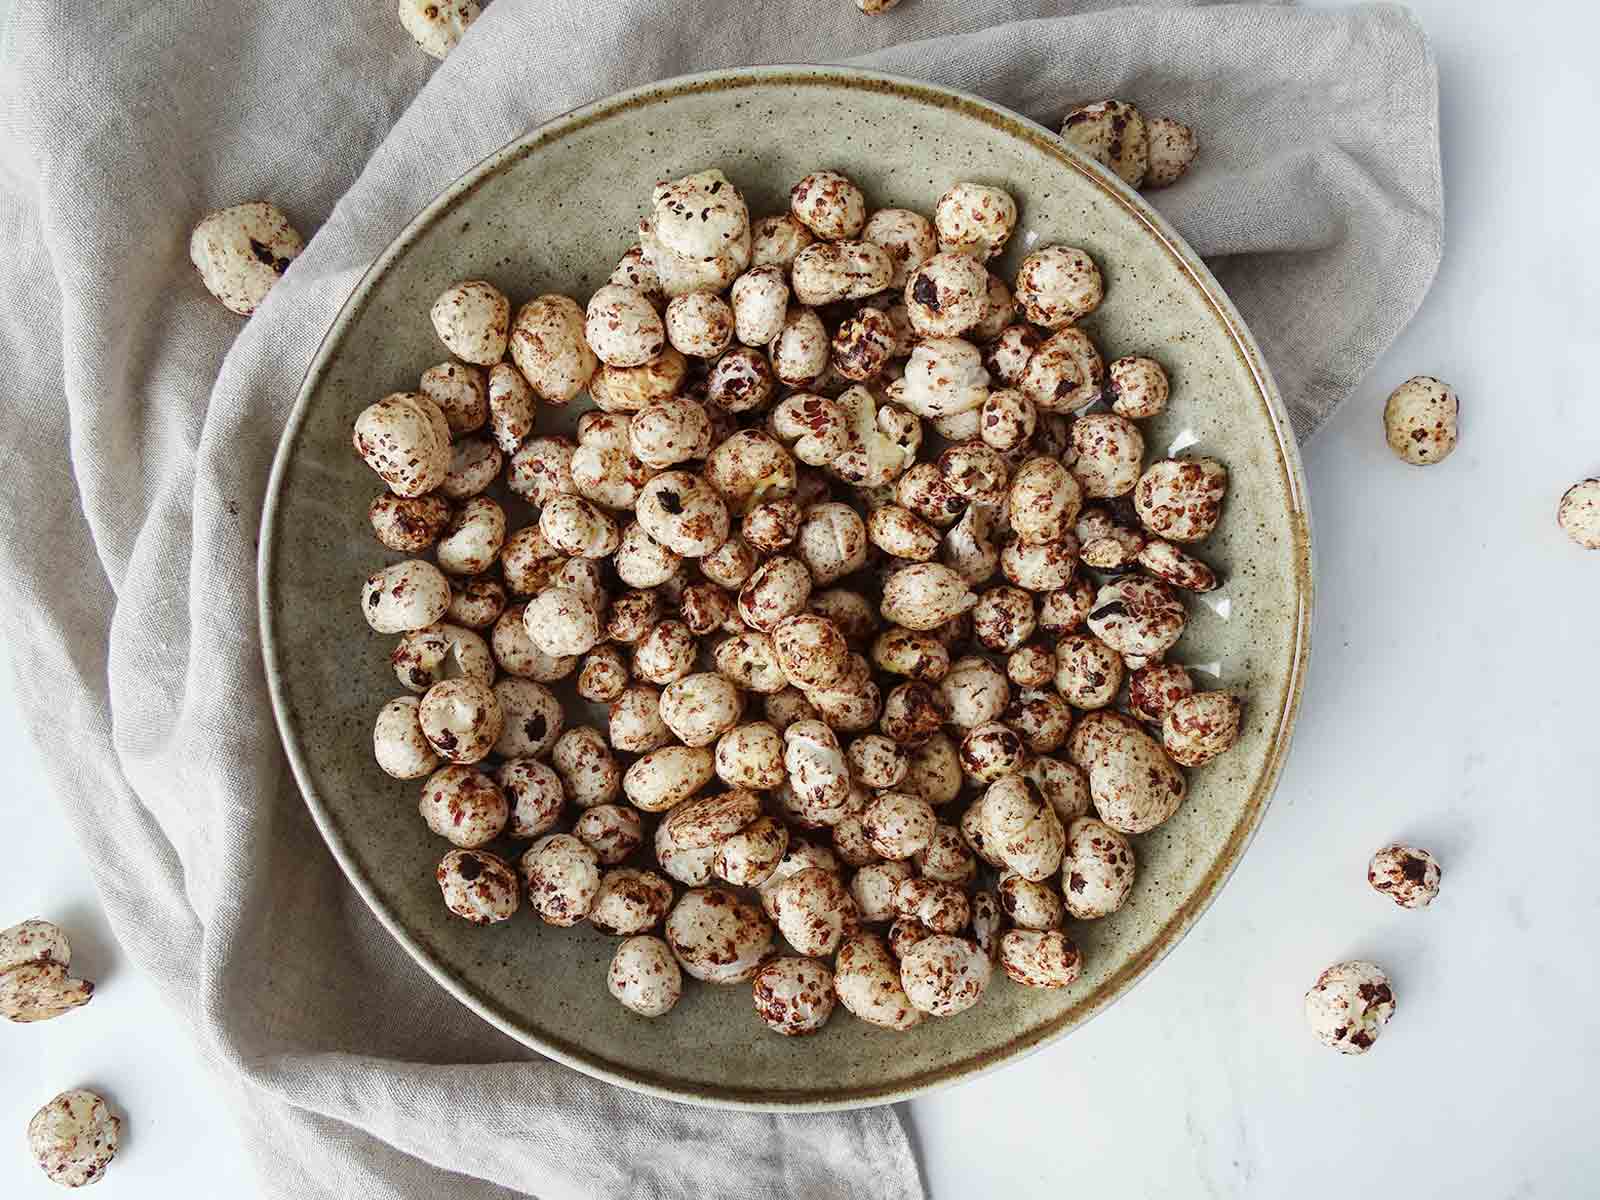 Popcorn Substitute on the Candida Diet - Popped Lotus Seeds